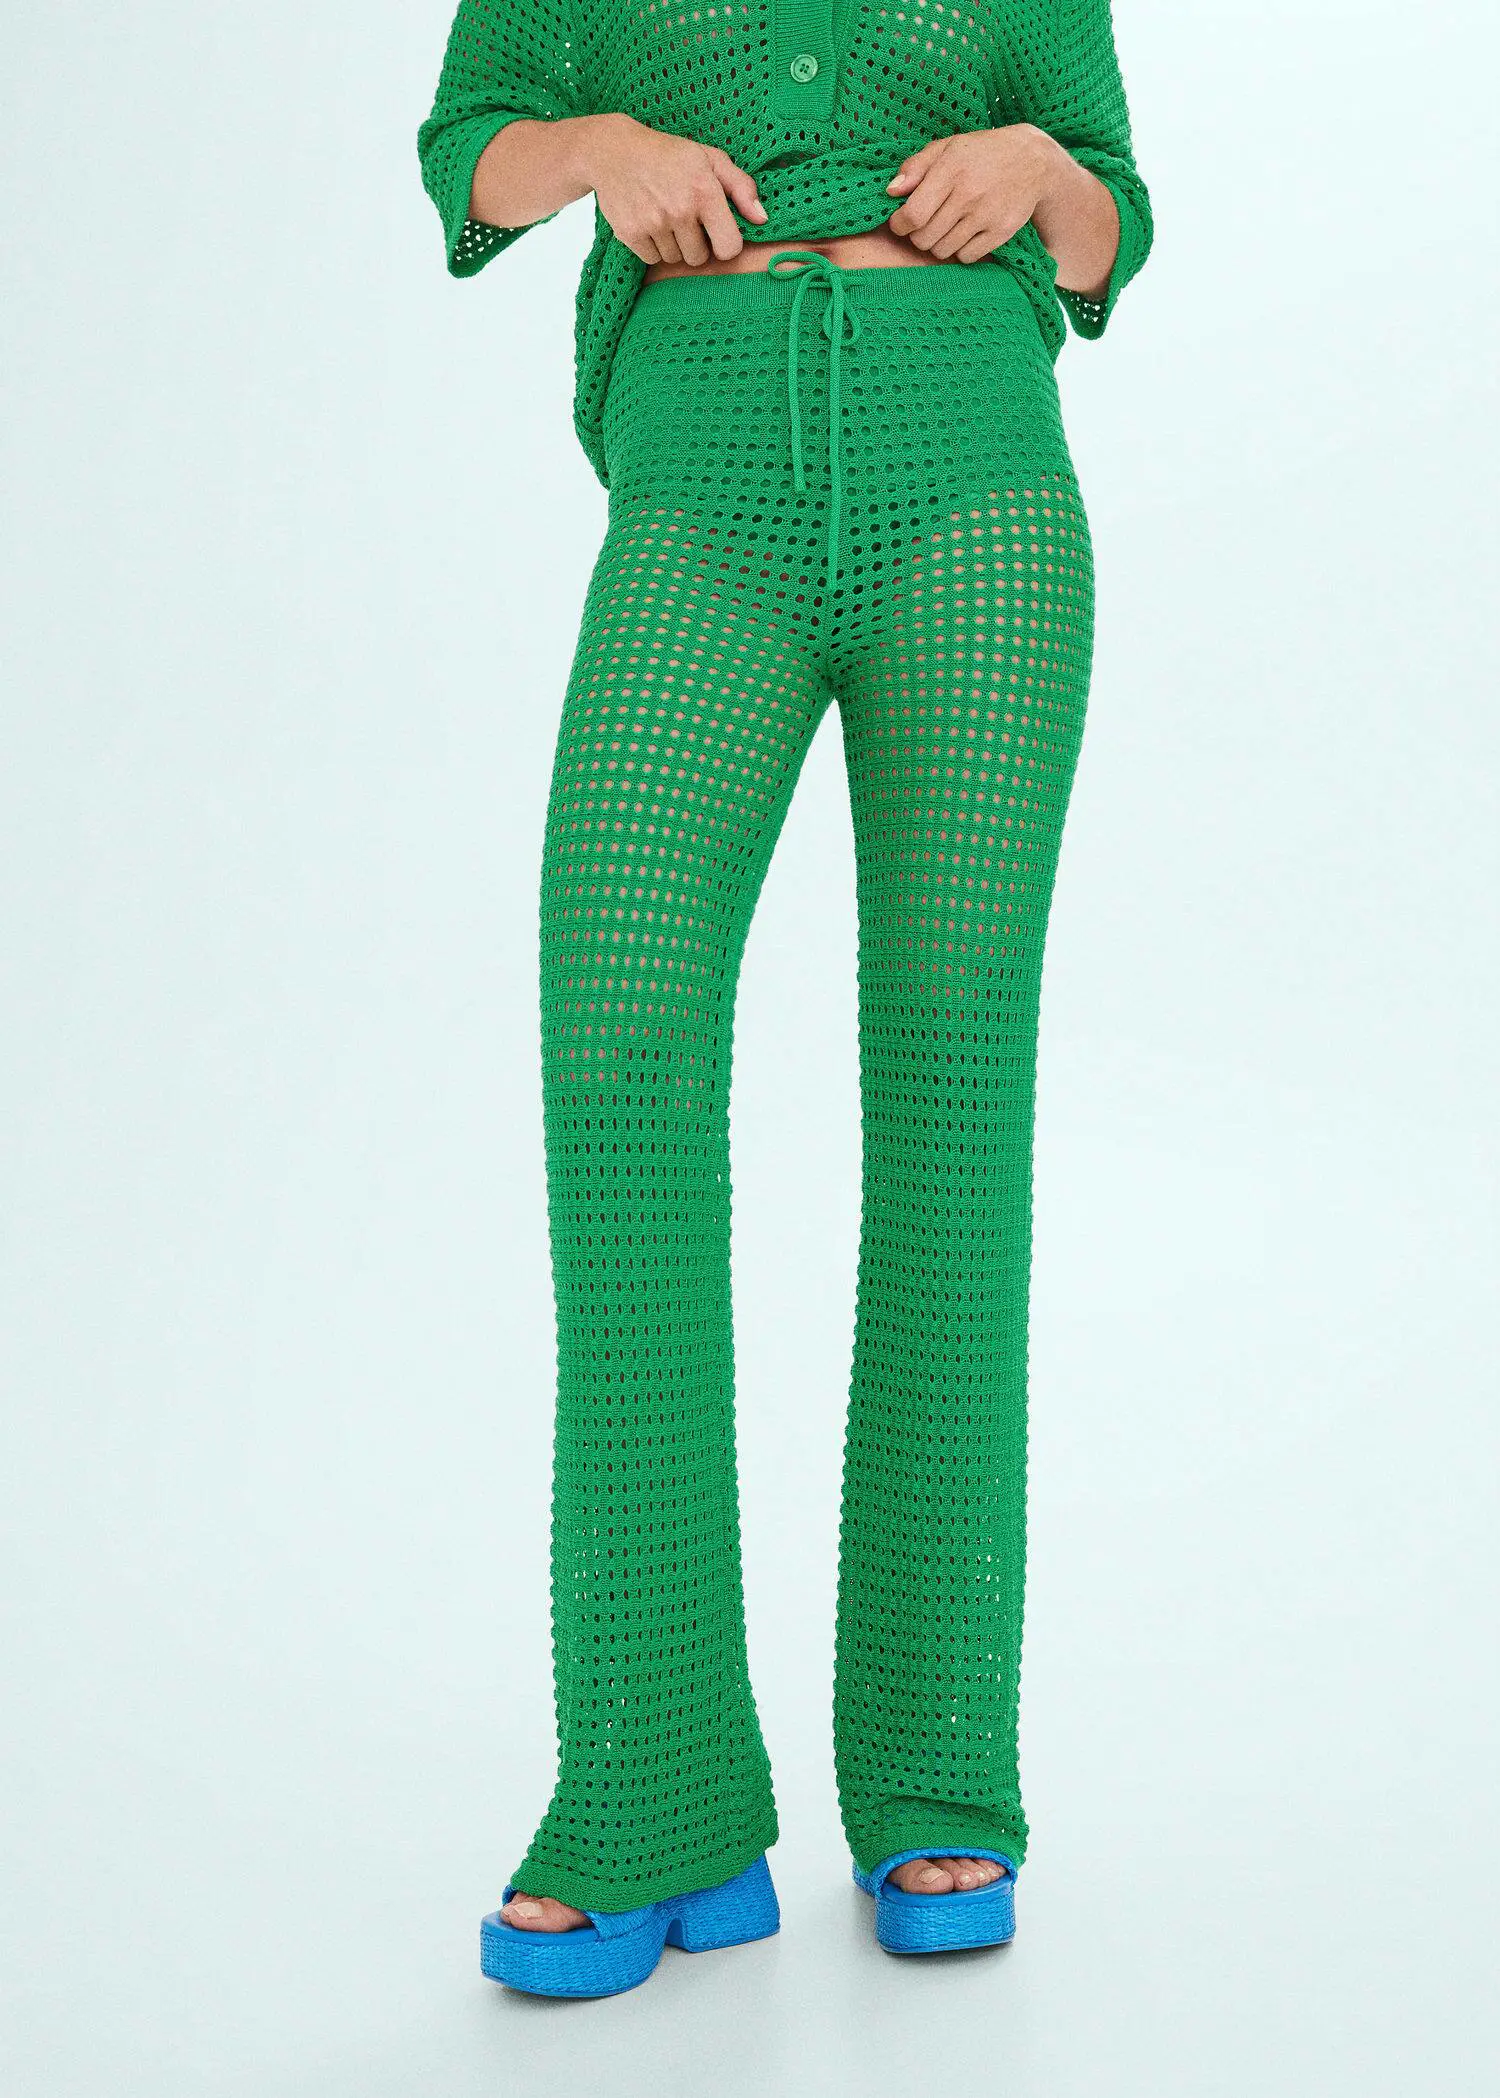 Mango Openwork knit trousers. a person wearing a green outfit standing up. 